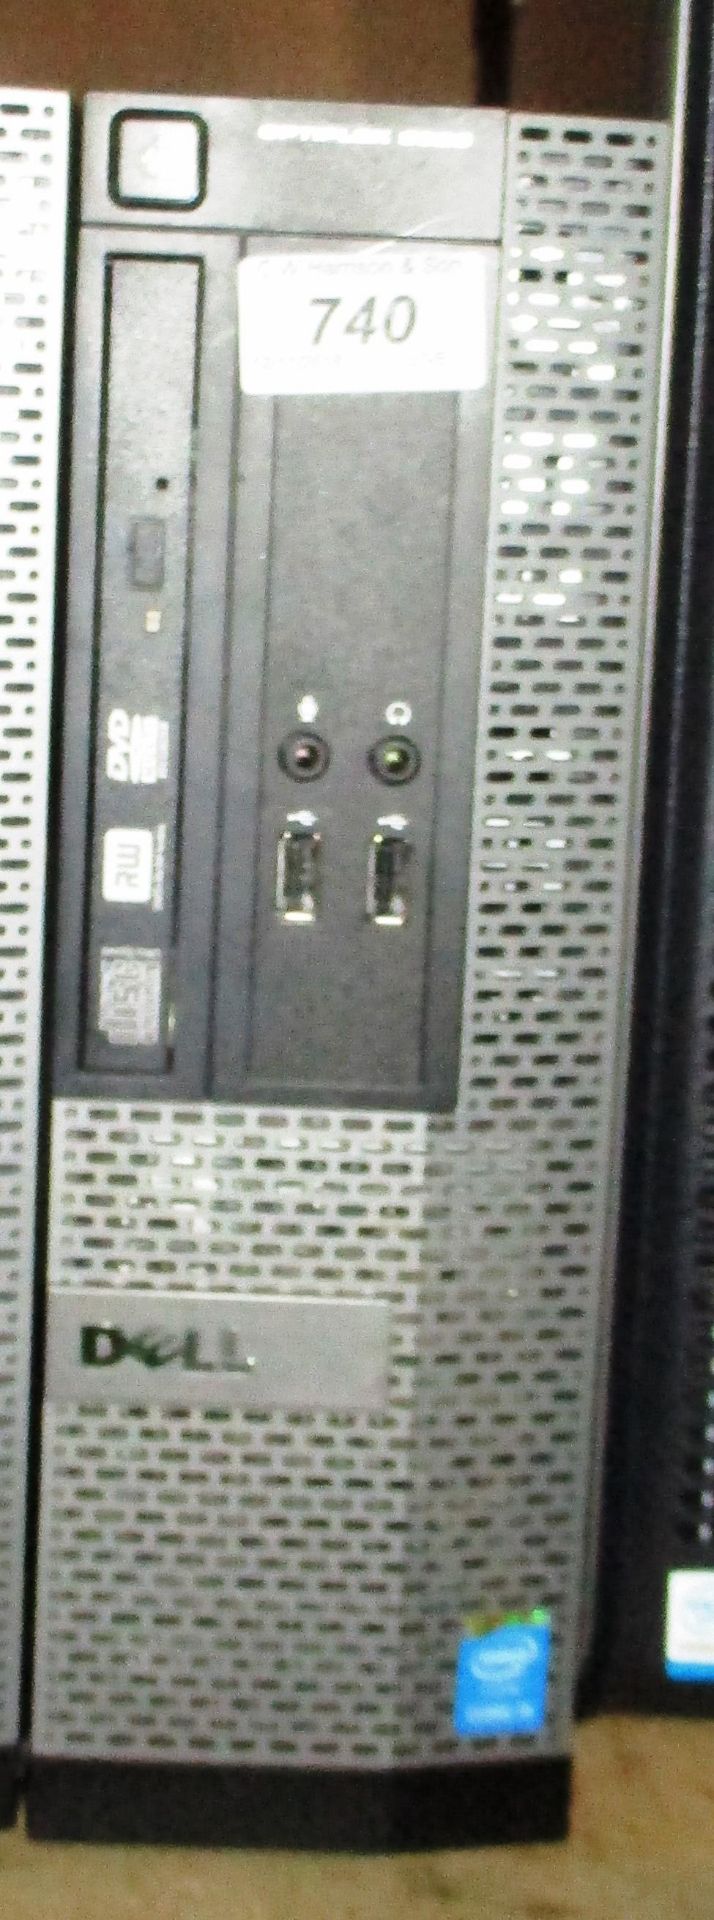 A Dell Optiplex 3020 tower computer - power lead